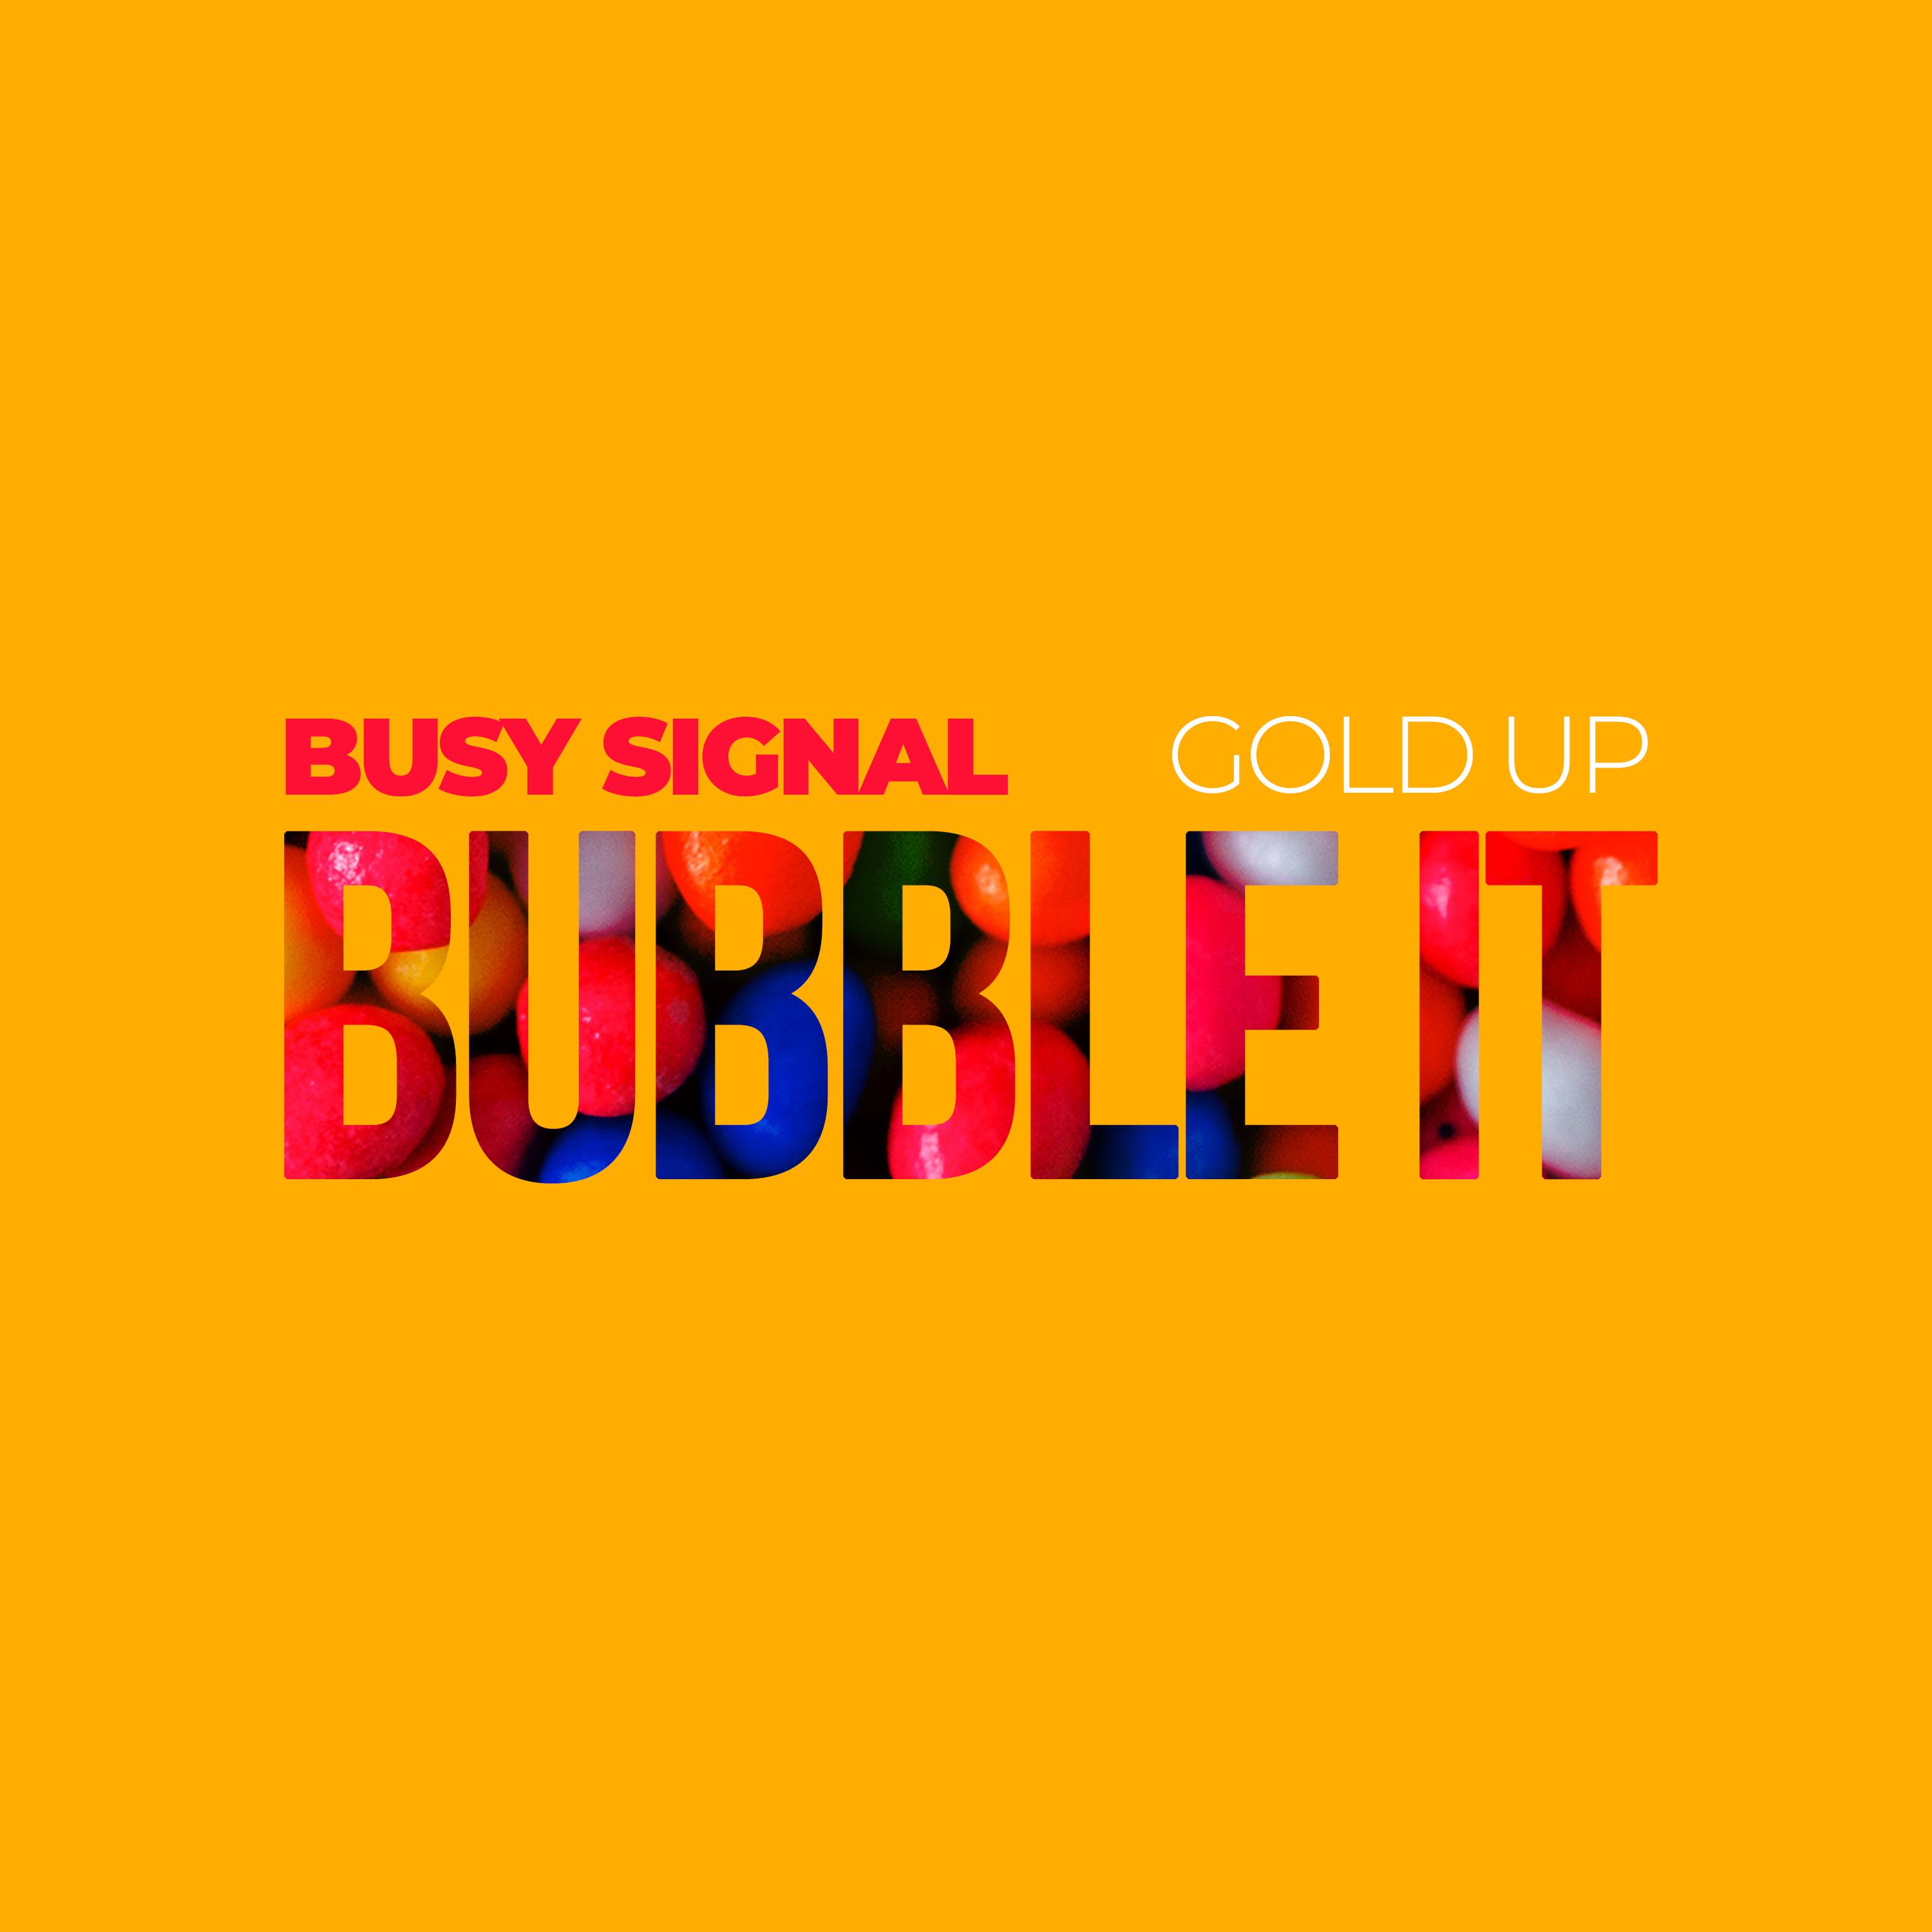 Busy Signal - Bubble It